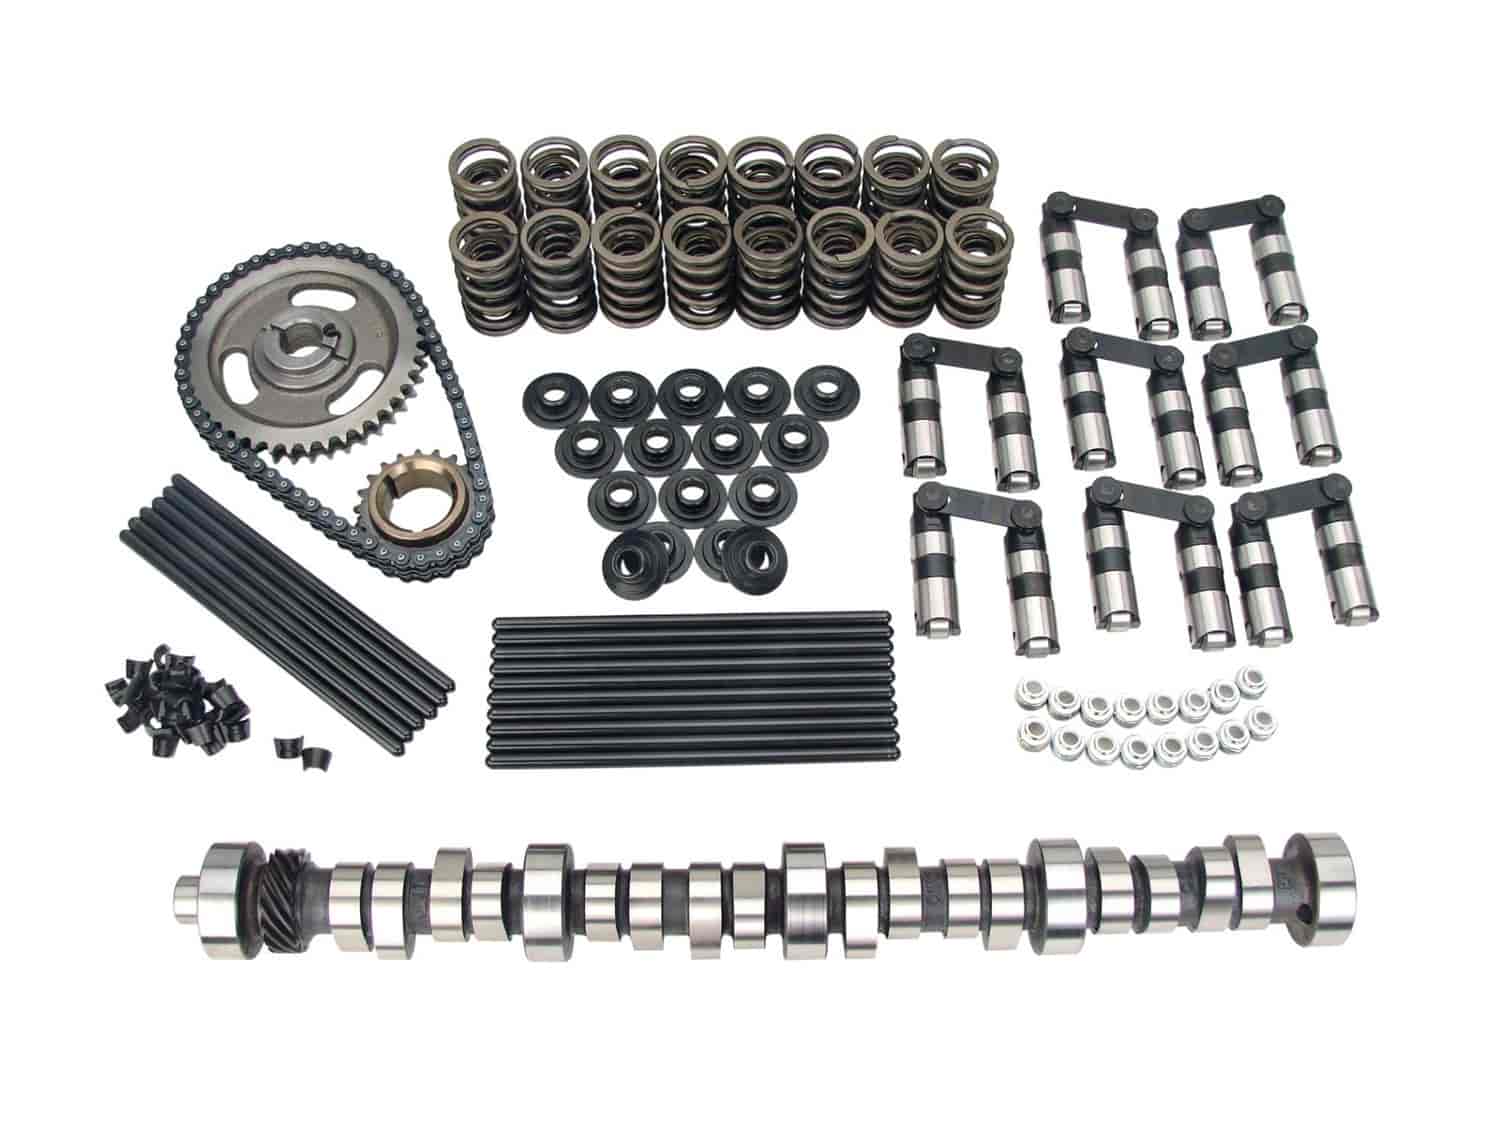 Big Mutha Thumpr Retro-Fit Hydraulic Roller Camshaft Complete Kit Lift: .552"/.538"